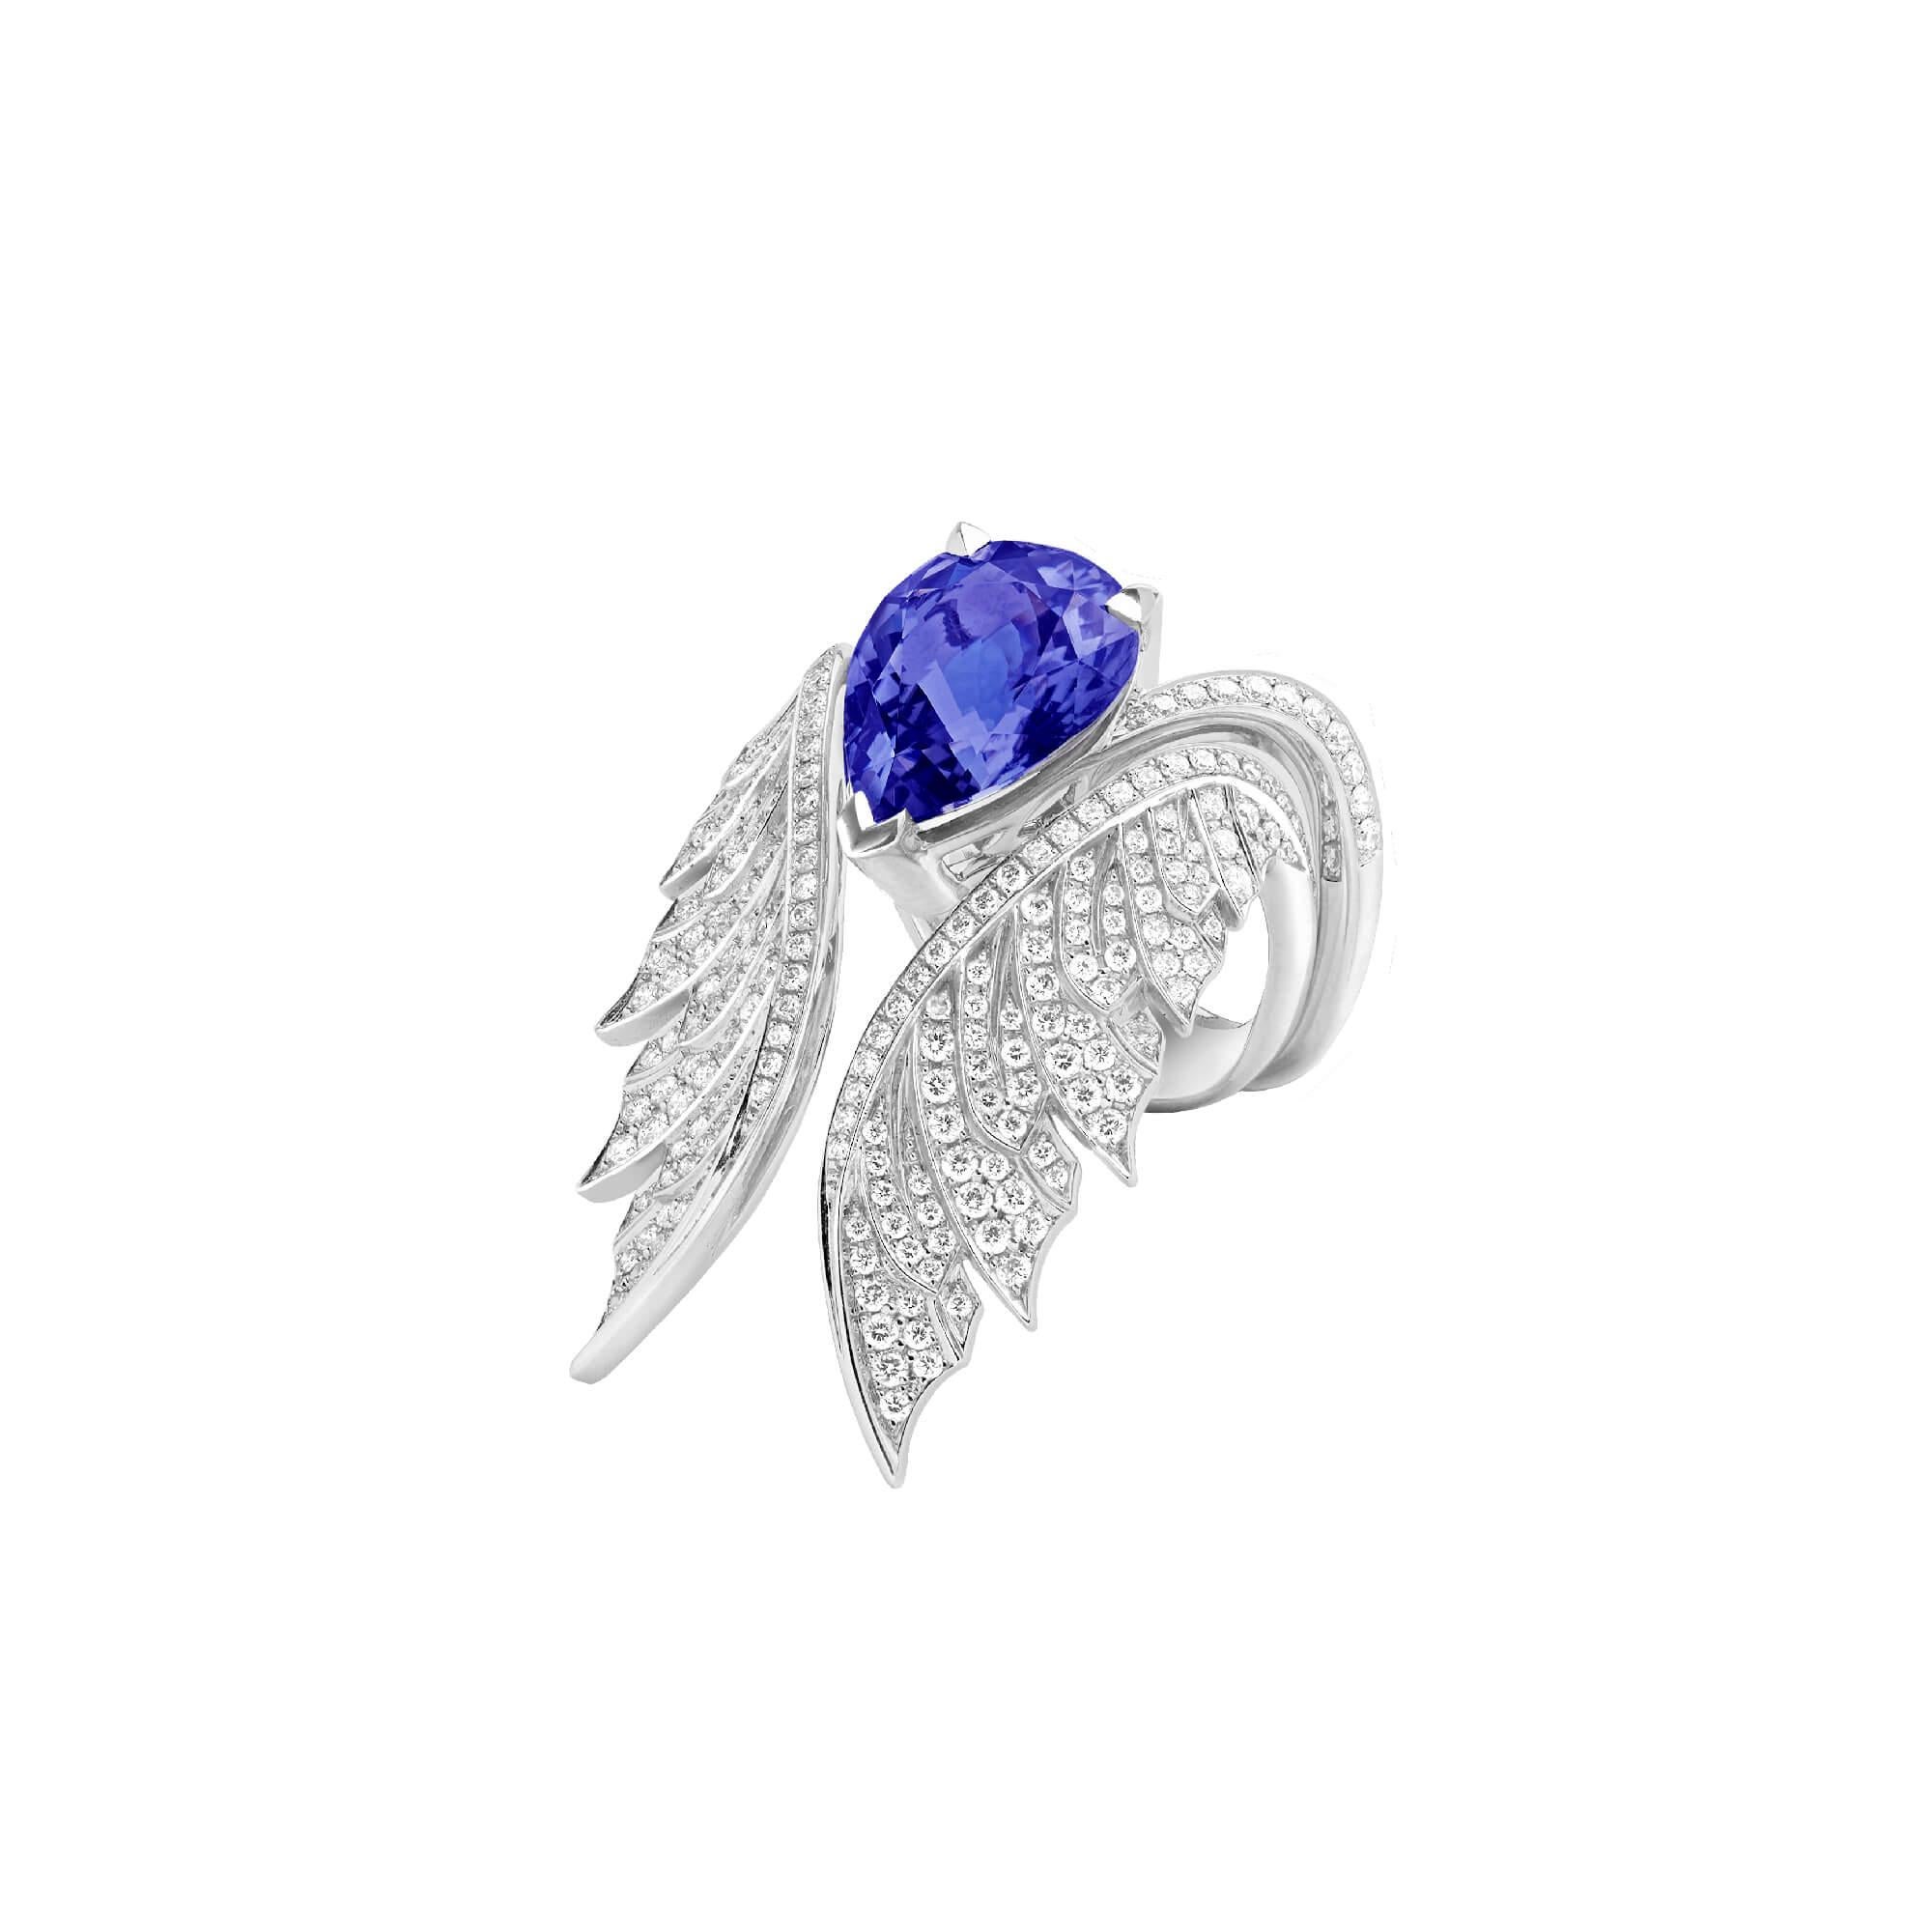 18ct white gold cocktail ring with white diamond pavé (0.18ct) and a centre pear-shaped tanzanite (4.93ct). The Pavé Cocktail Ring can be worn as an inner to the Magnipheasant Open Feather Ring, available in white gold.

Please enquire for available